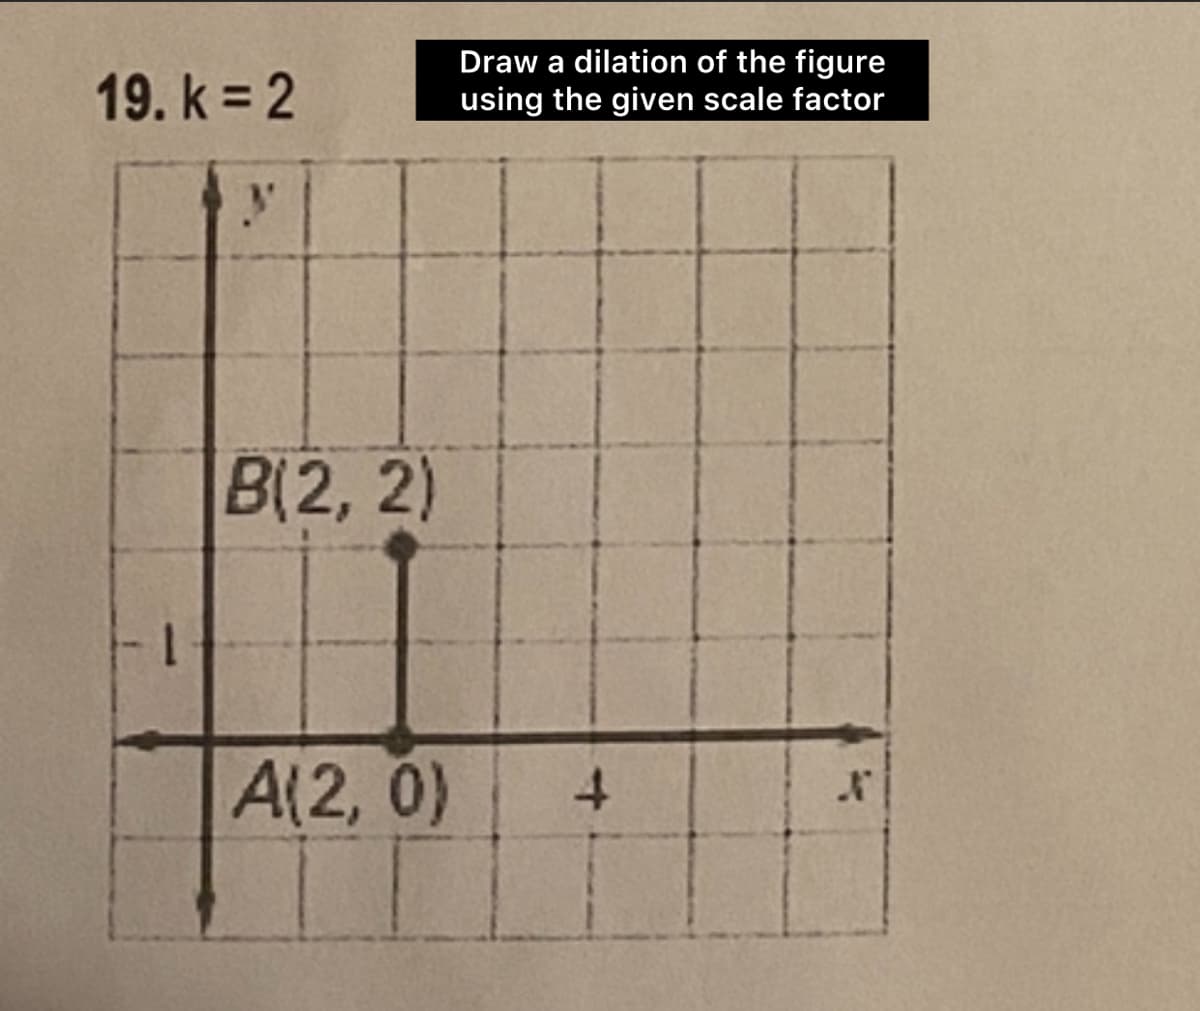 19. k = 2
Draw a dilation of the figure
using the given scale factor
B(2,2)
A(2,0)
4